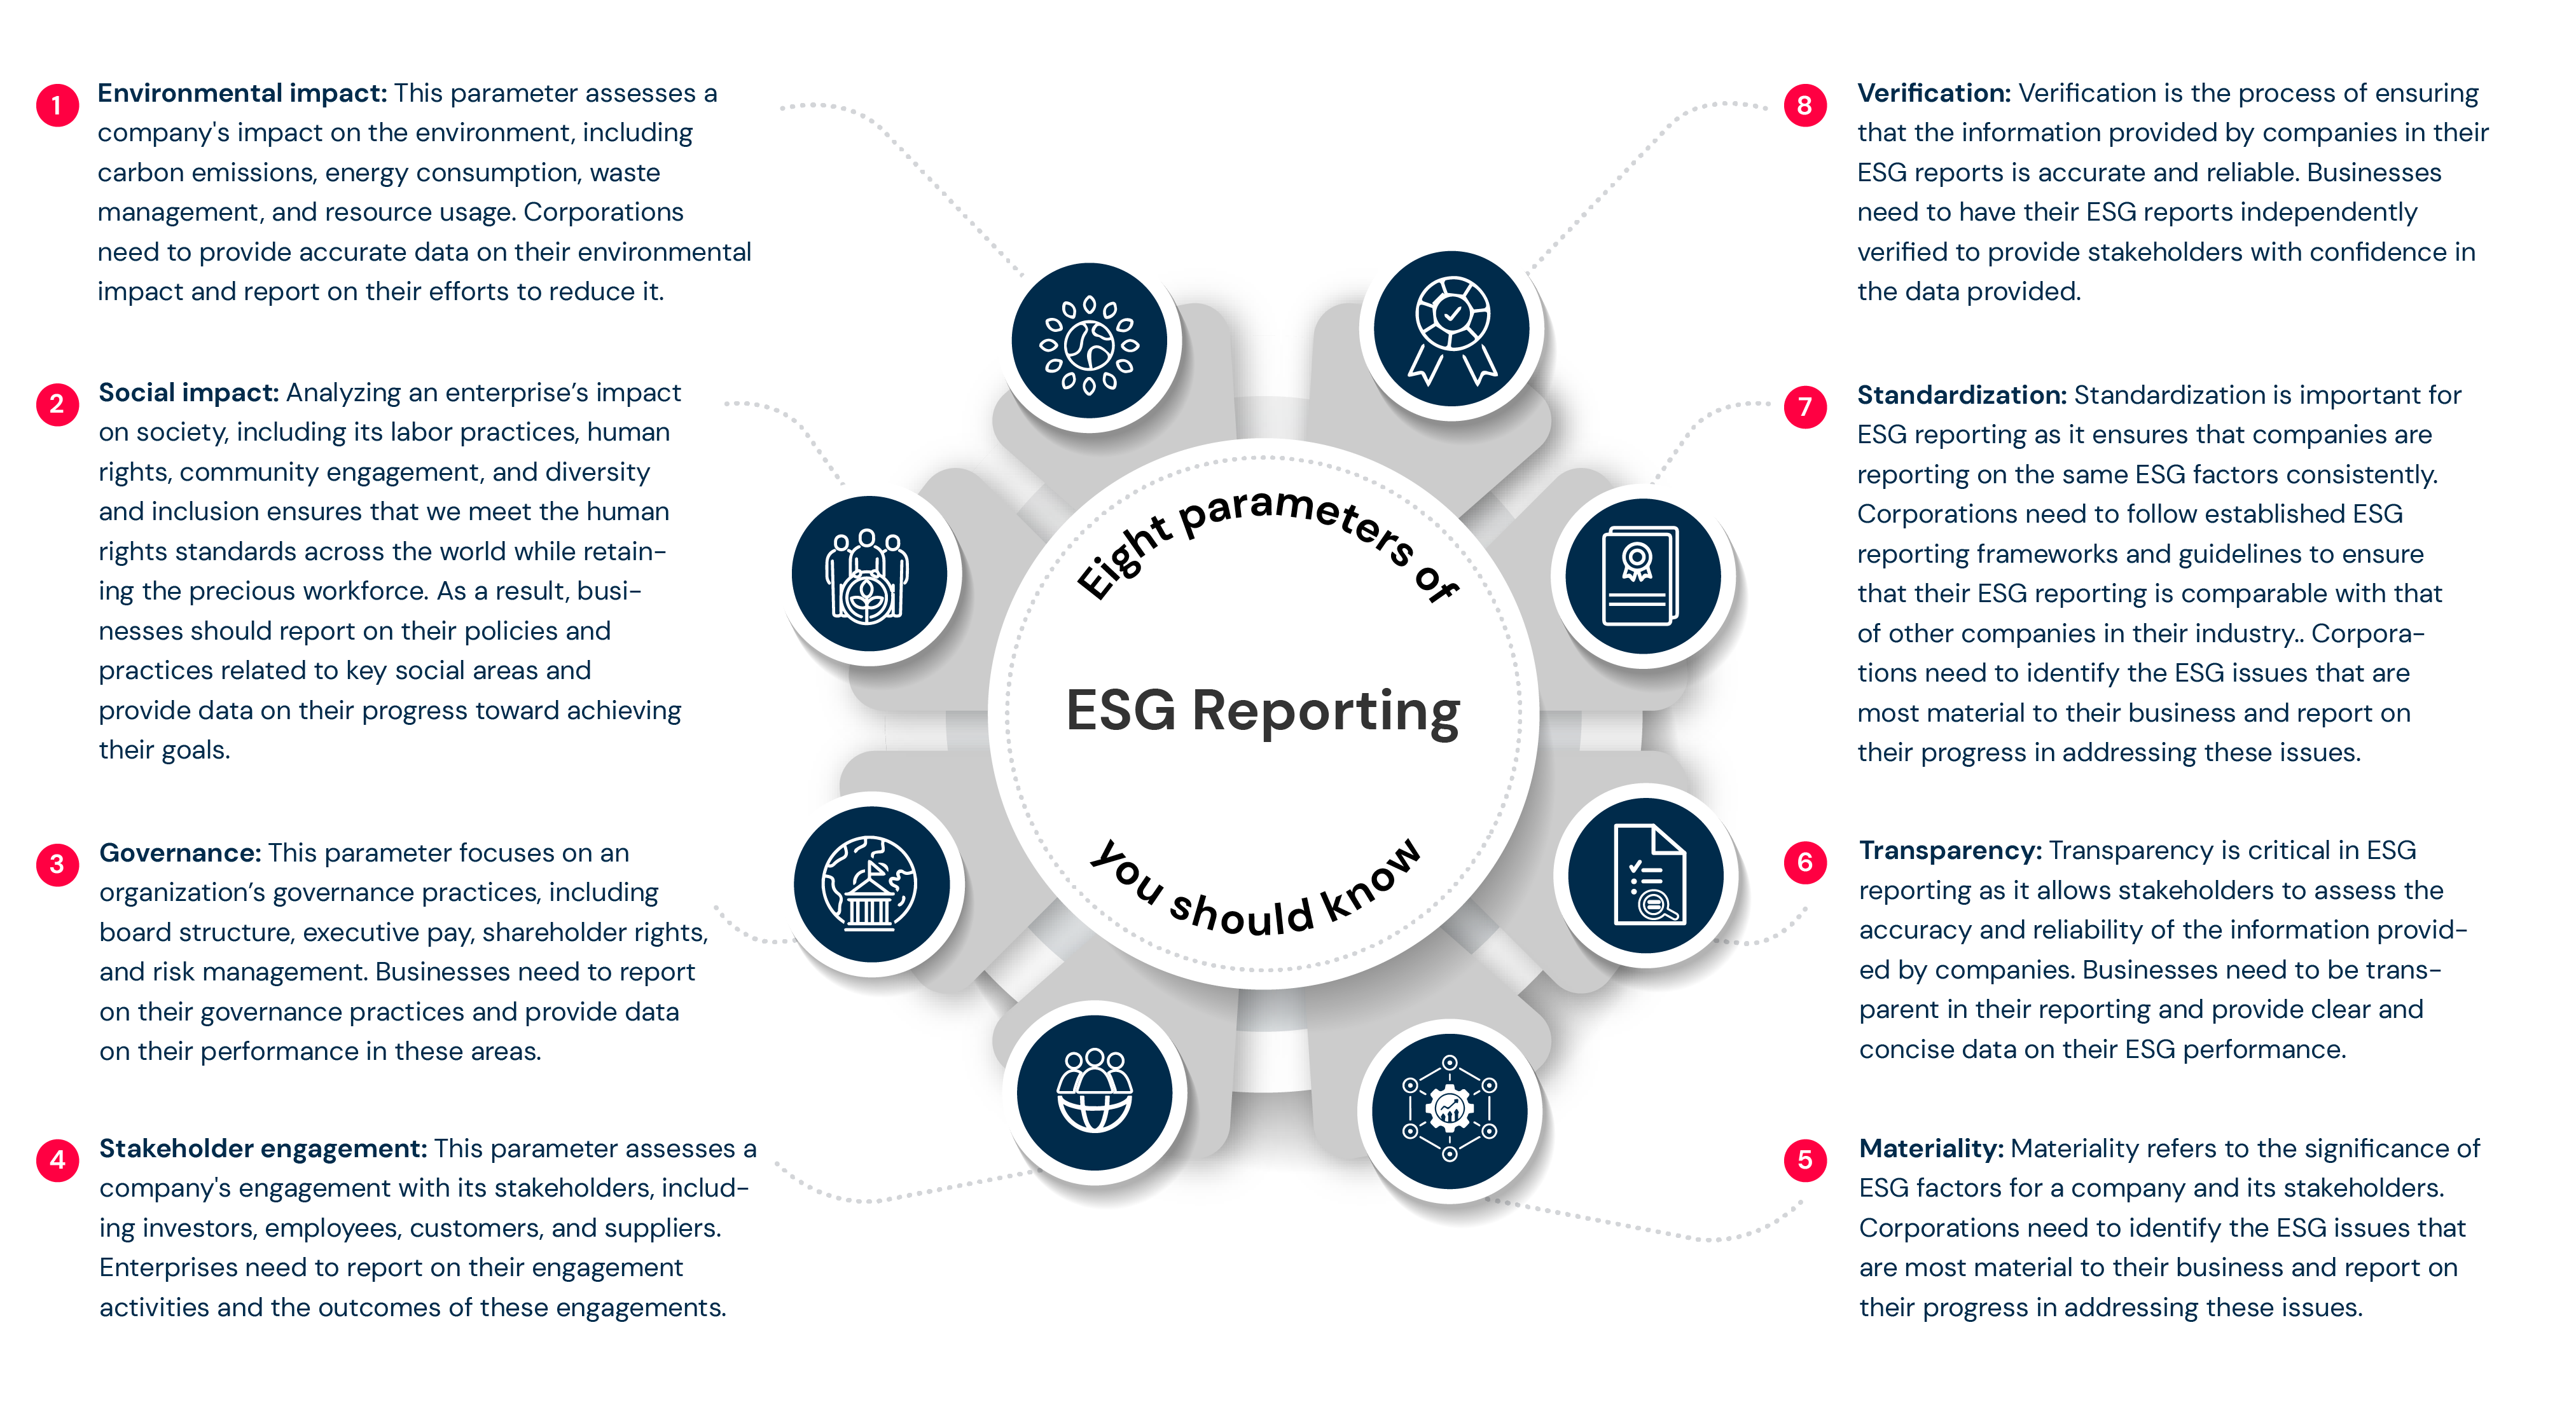 The eight key parameters of ESG reporting you should know